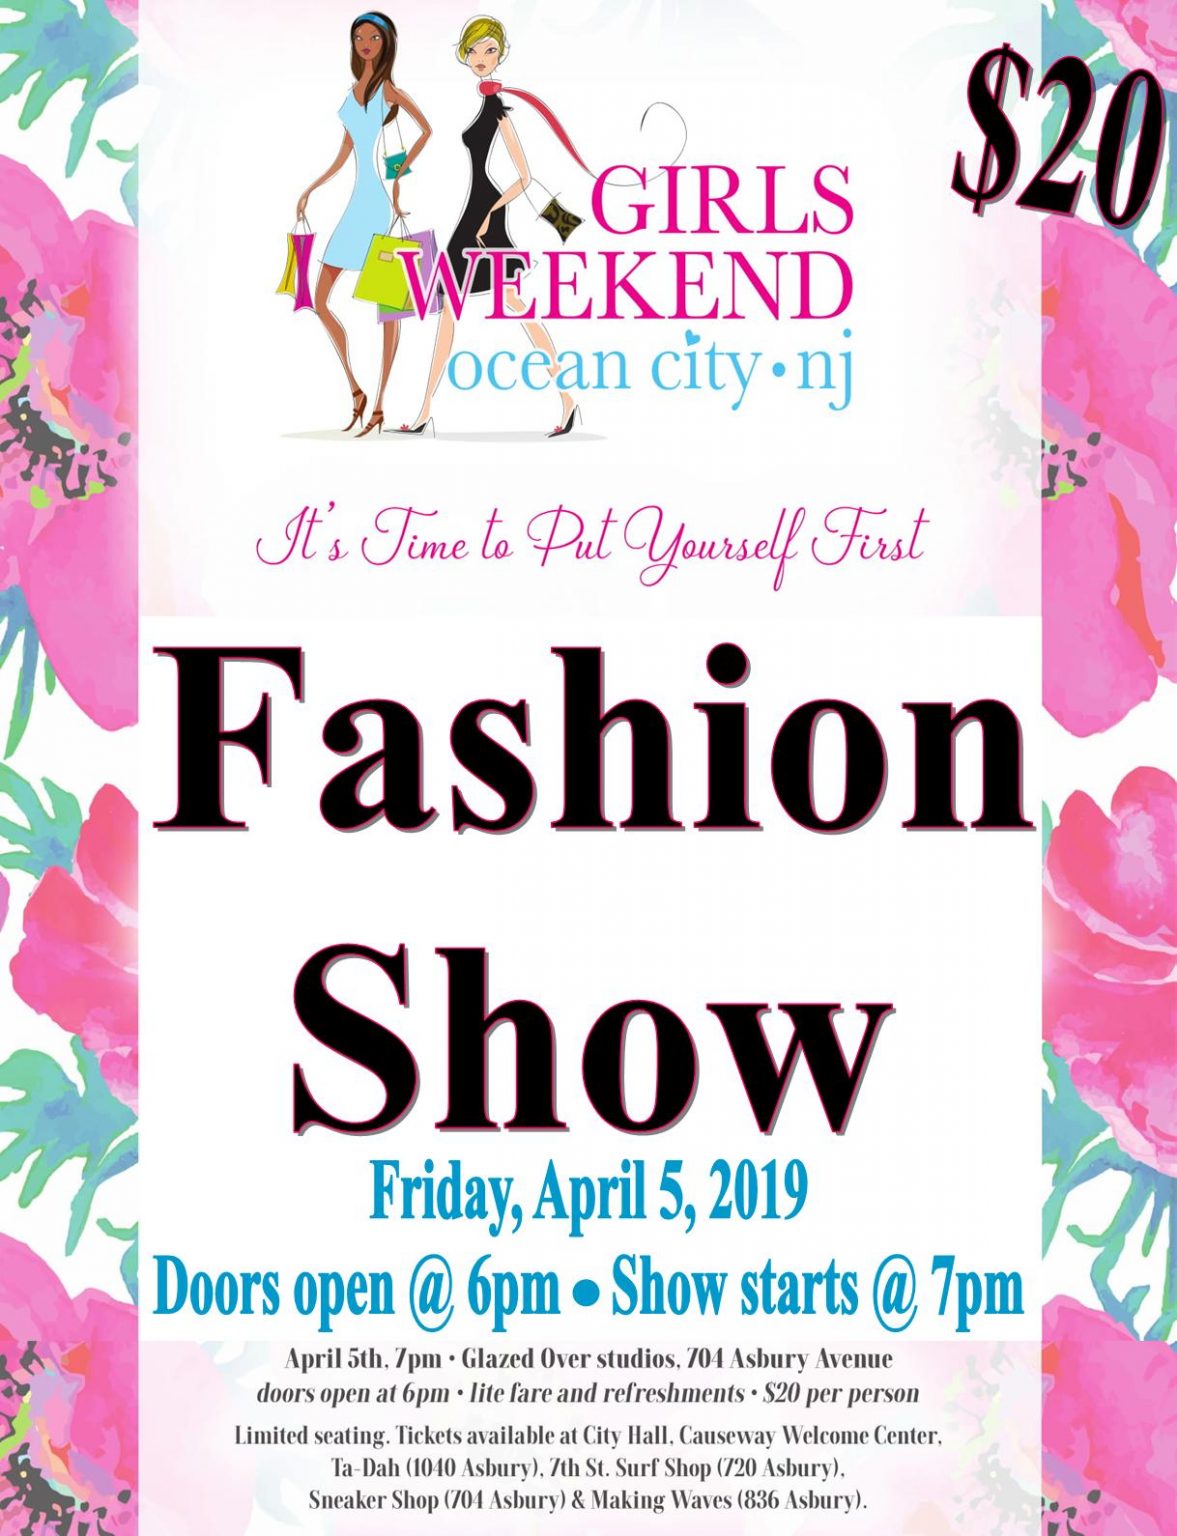 Free Fashion Show Flyer Template (11 Remarkable Ideas)